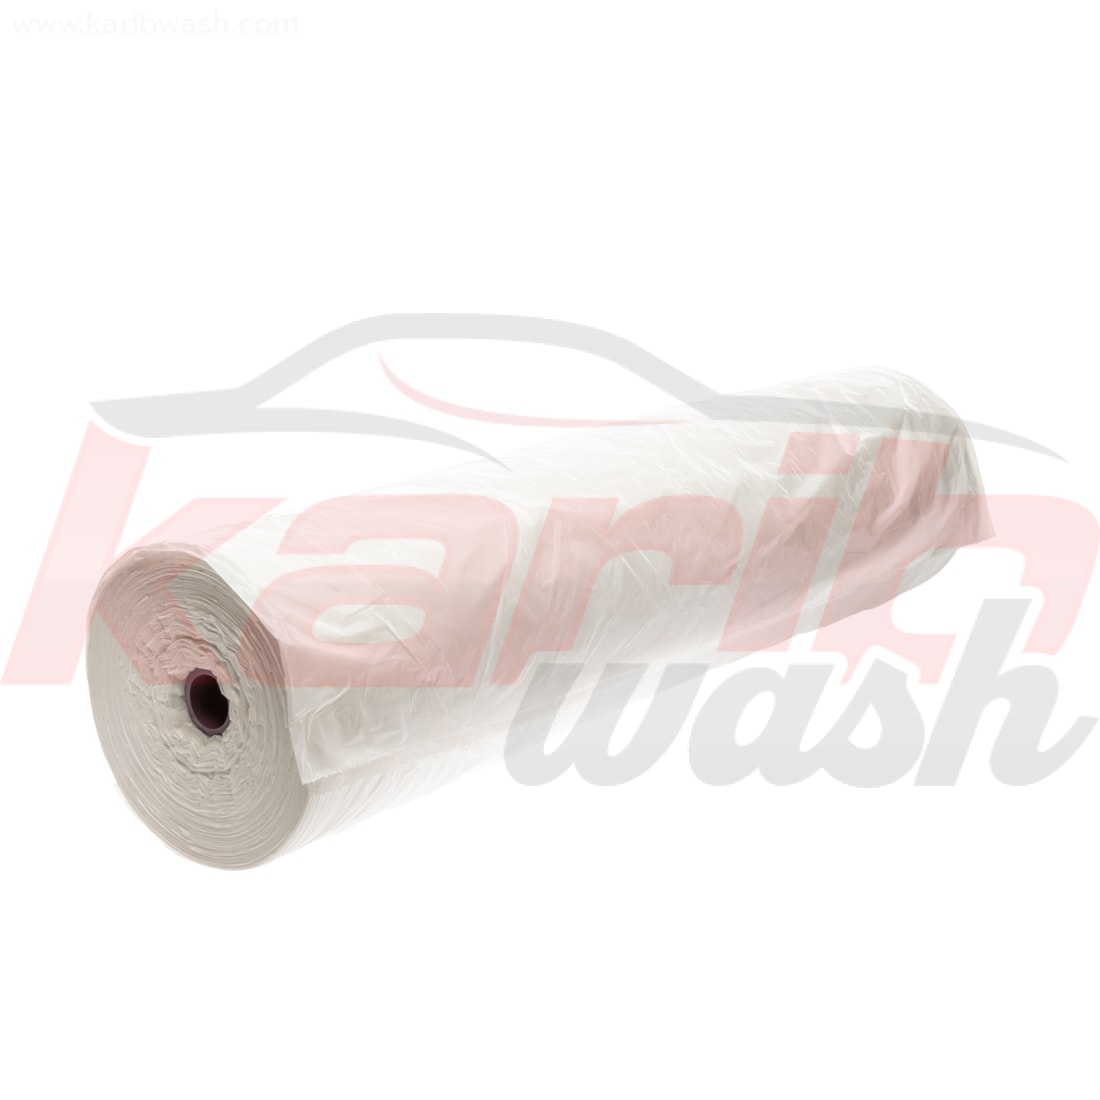 Protective seat cover, PE, white, roll with 500 pc. (Housse de siège) - KARIBWASH